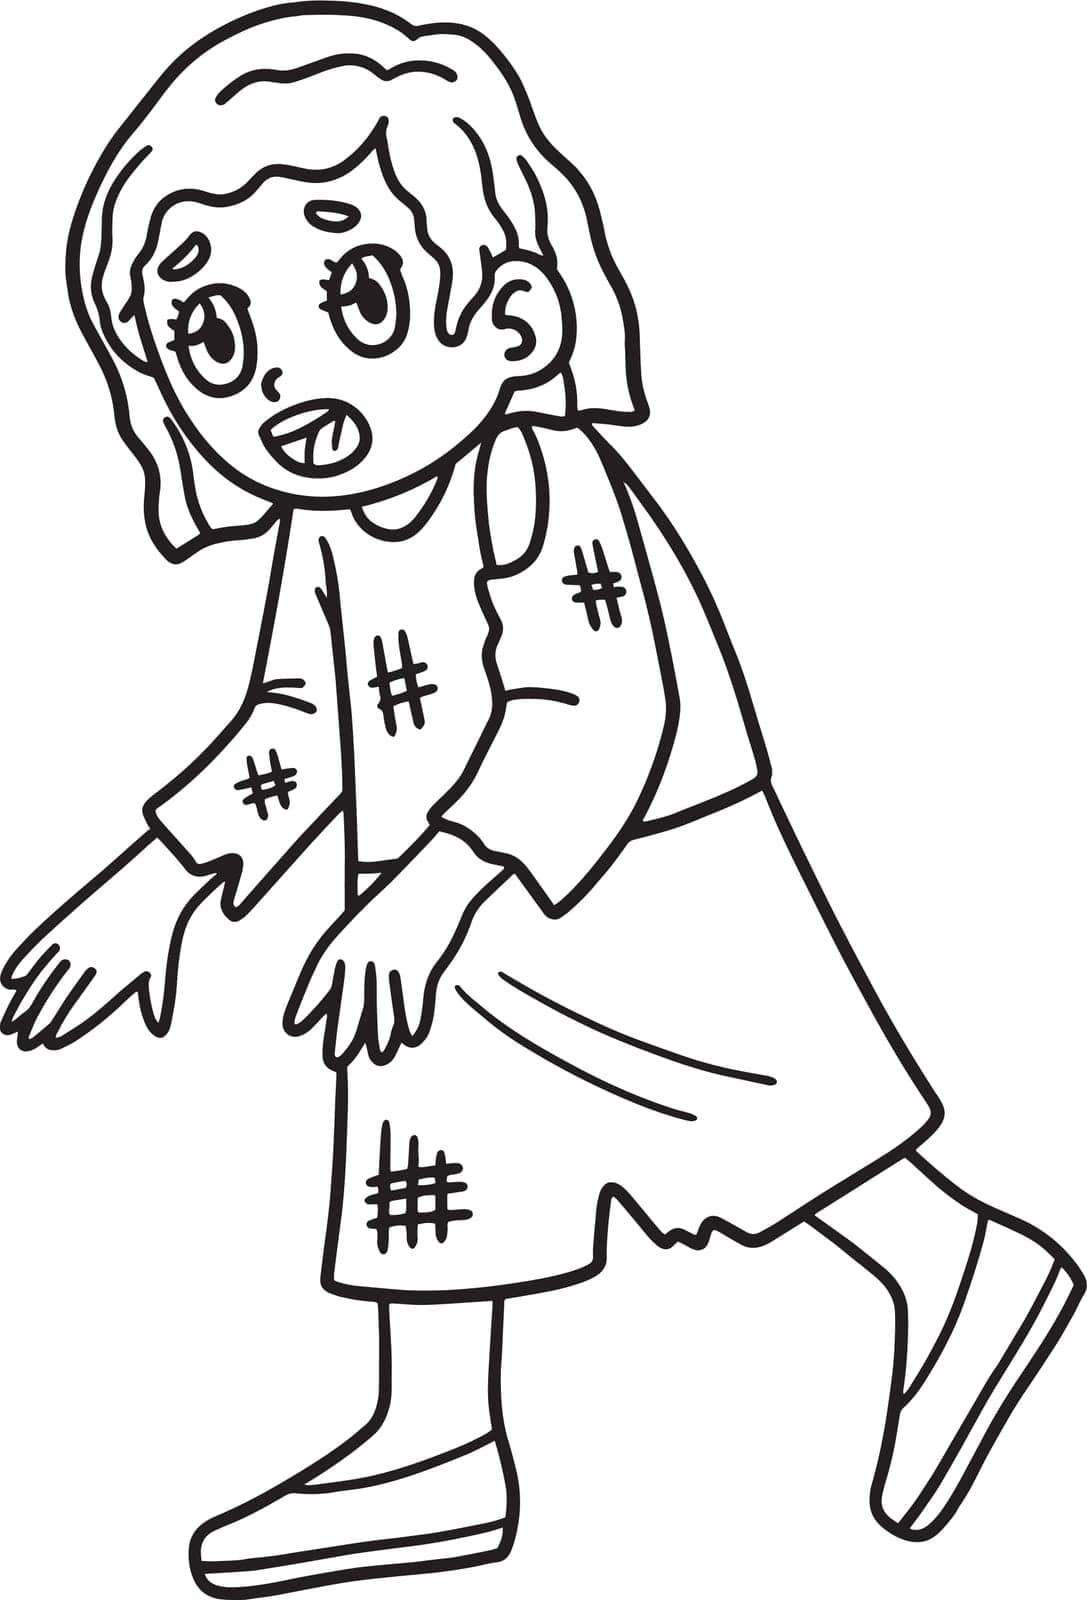 Child Walking Isolated Coloring Page for Kids by abbydesign